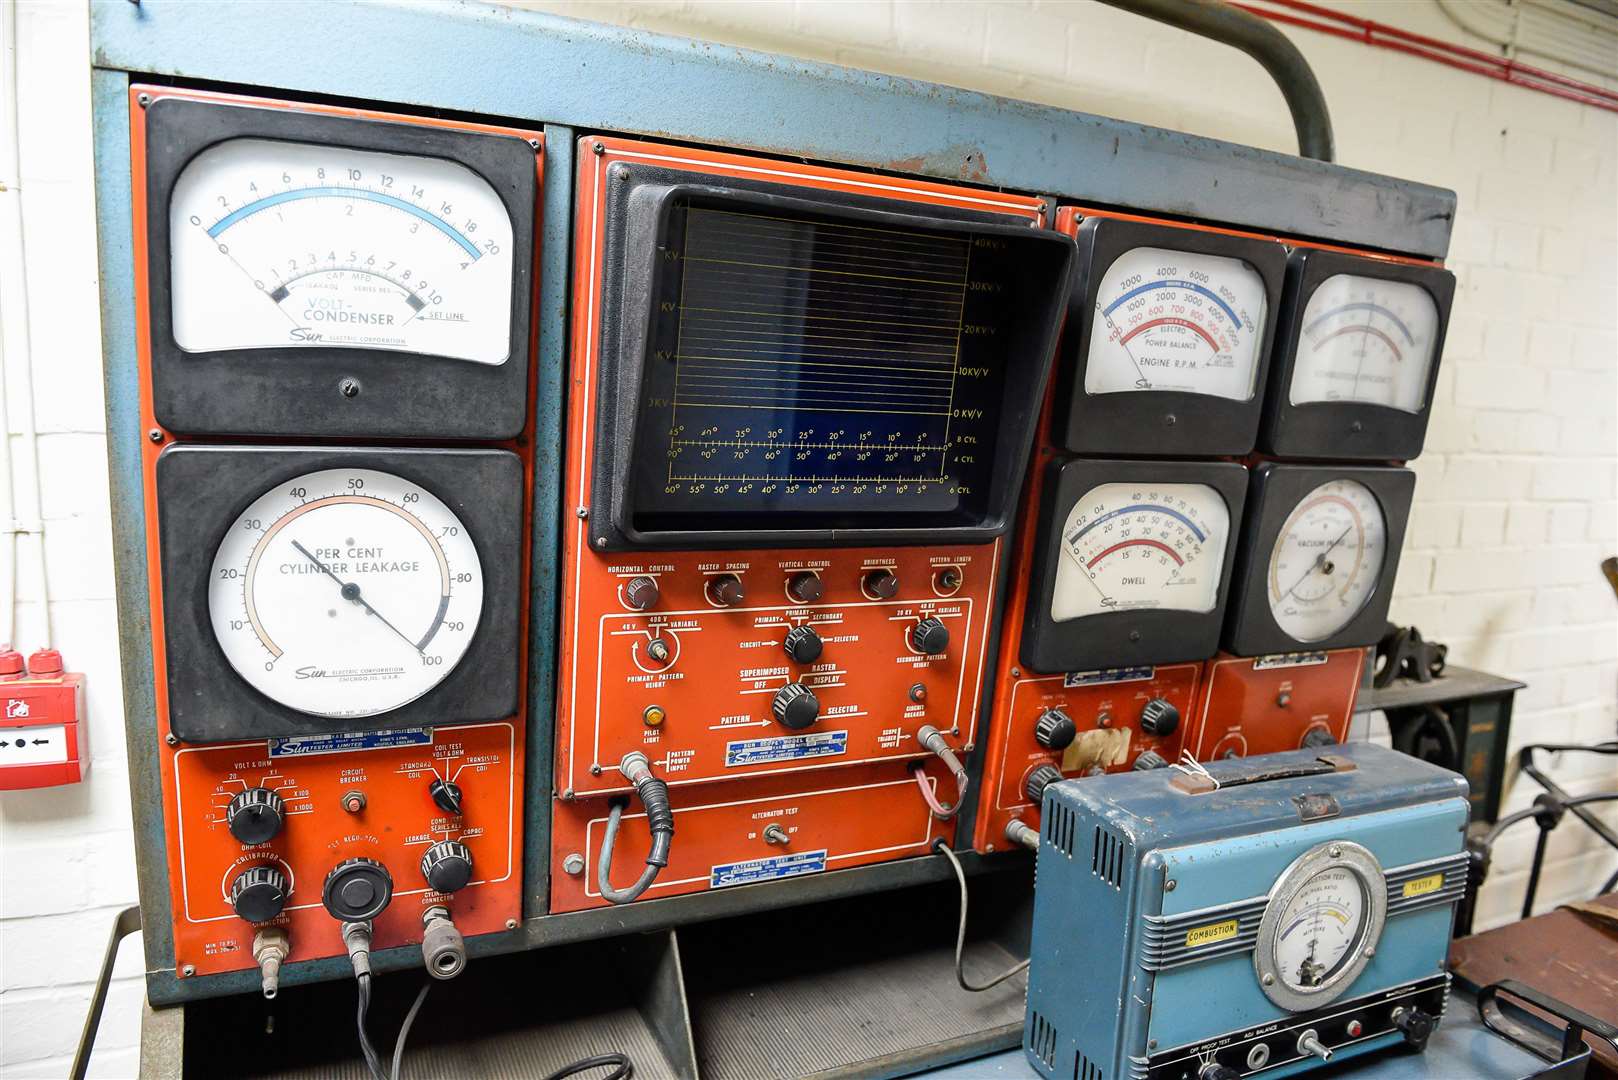 An old Sun Engine tuner and engine analyser once a popular site in local garage workshops